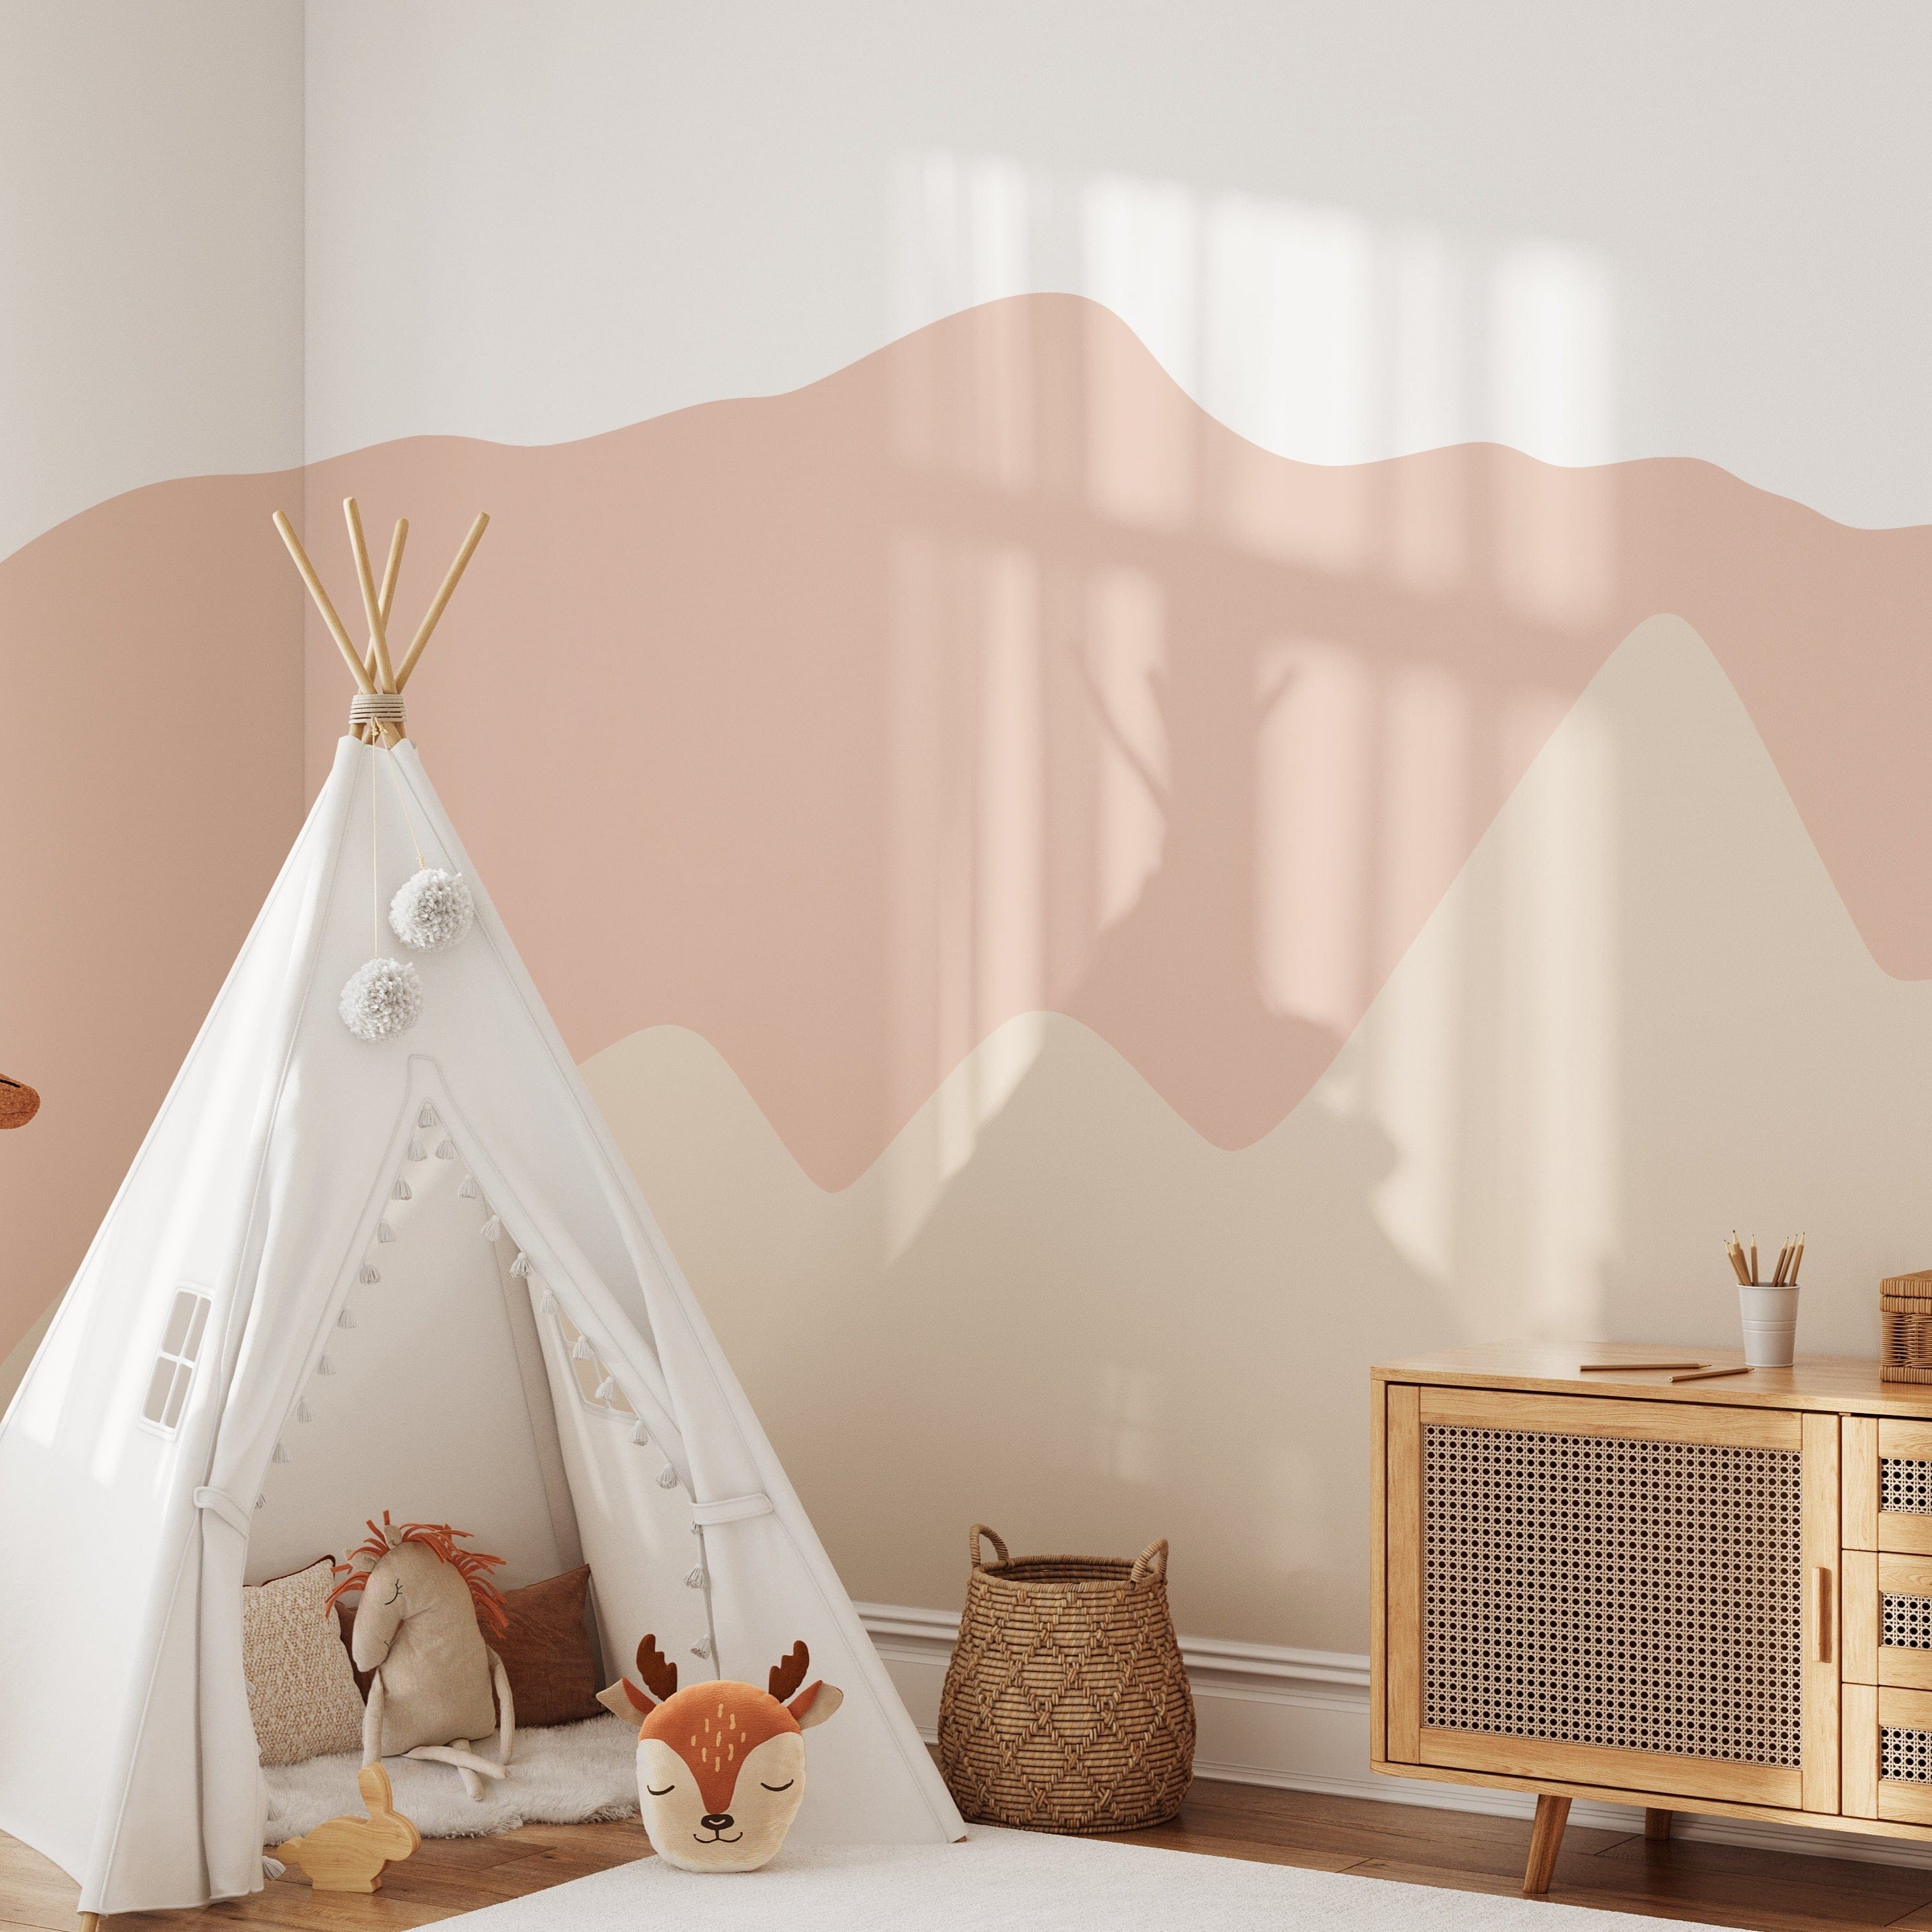 Pretty Hills Mural in a modern nursery setting with a white teepee, a plush deer toy, a wicker basket, and a wooden dresser. The mural features wavy pastel hills in calming shades of pink and beige.